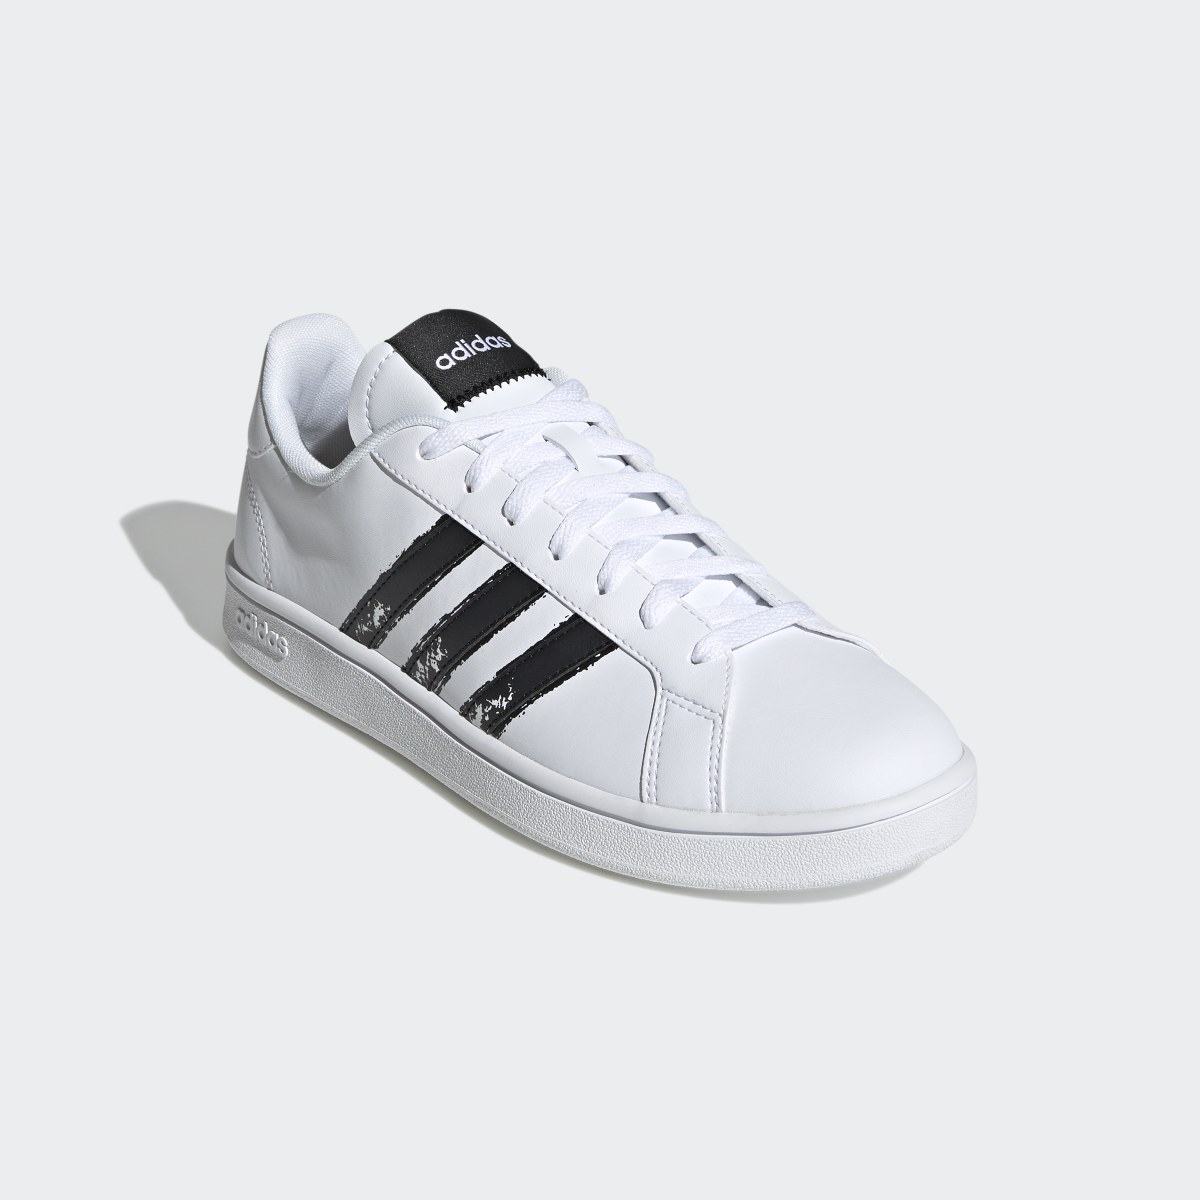 Adidas Grand Court Base Beyond Shoes. 5